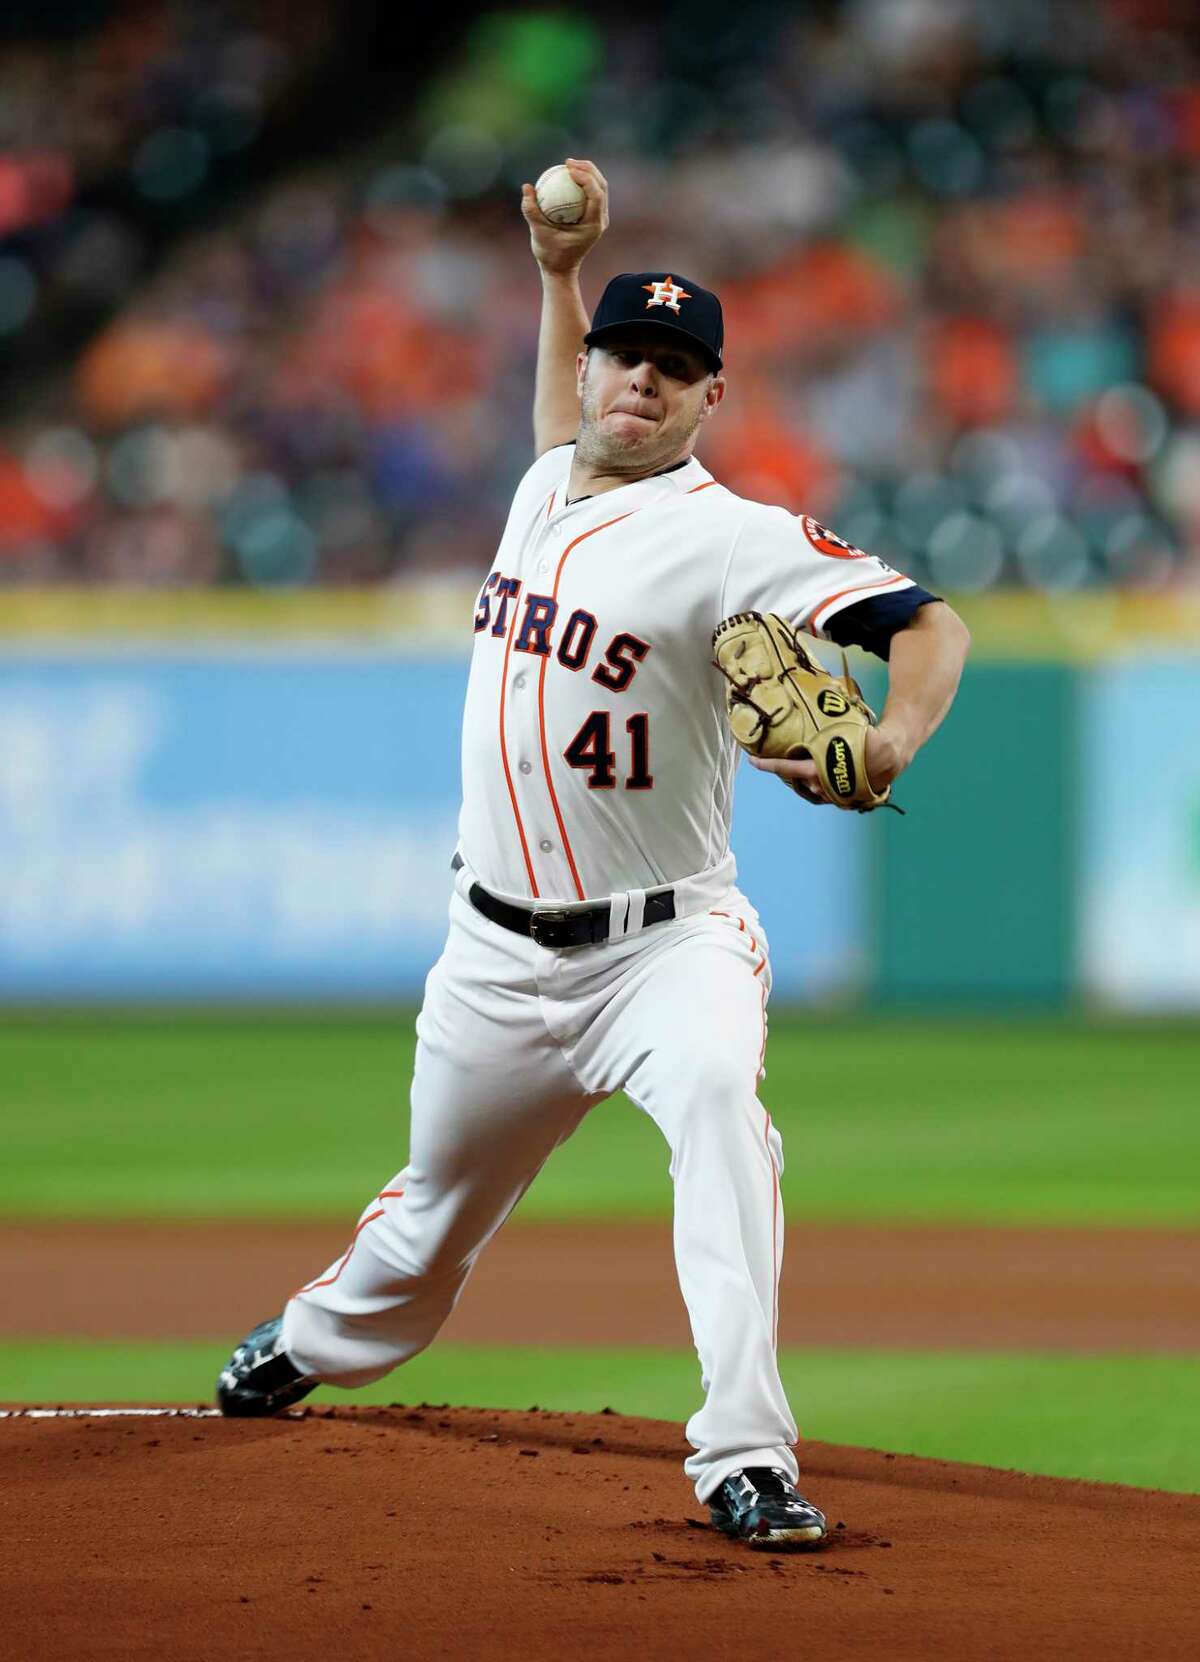 Houston Astros relief pitcher Brad Peacock (41) pitches during the first inning of an MLB baseball game at Minute Maid Park, Tuesday, July, 18, 2017.